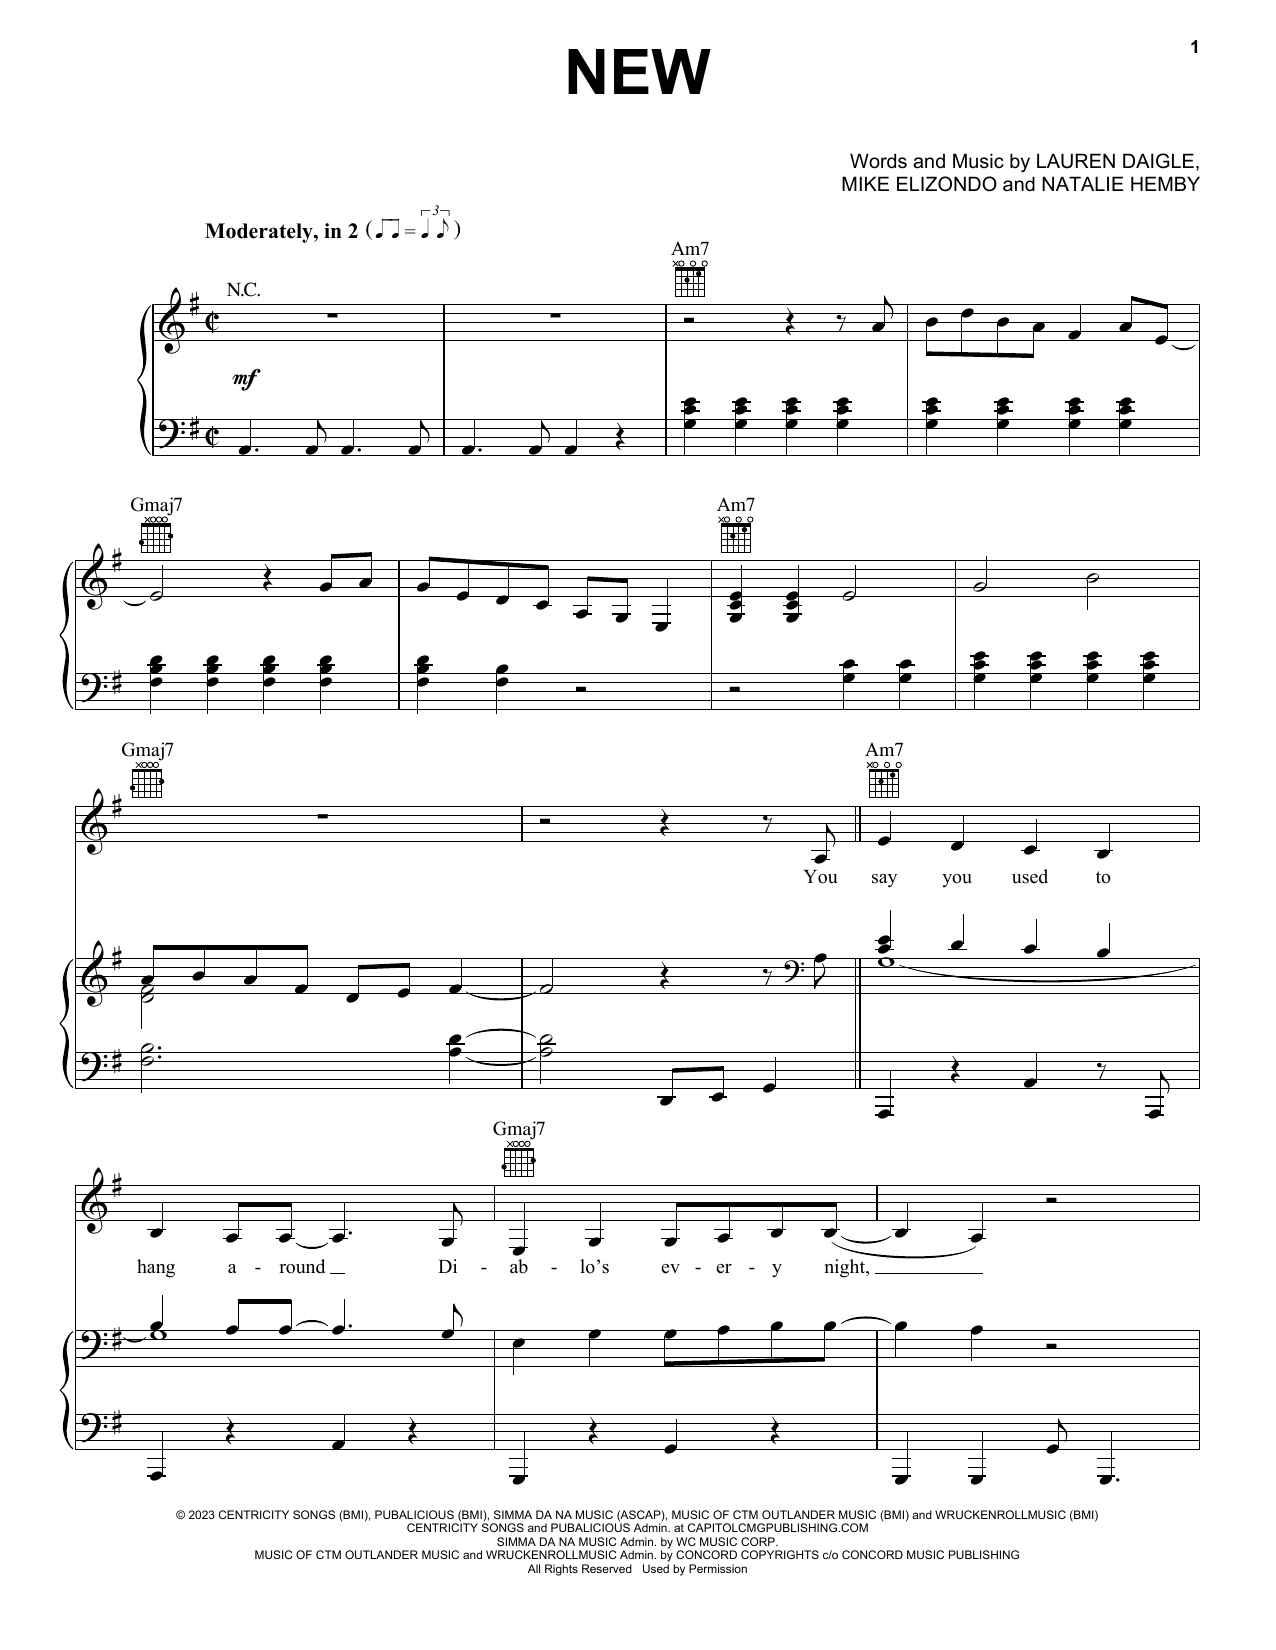 Lauren Daigle New sheet music notes and chords. Download Printable PDF.